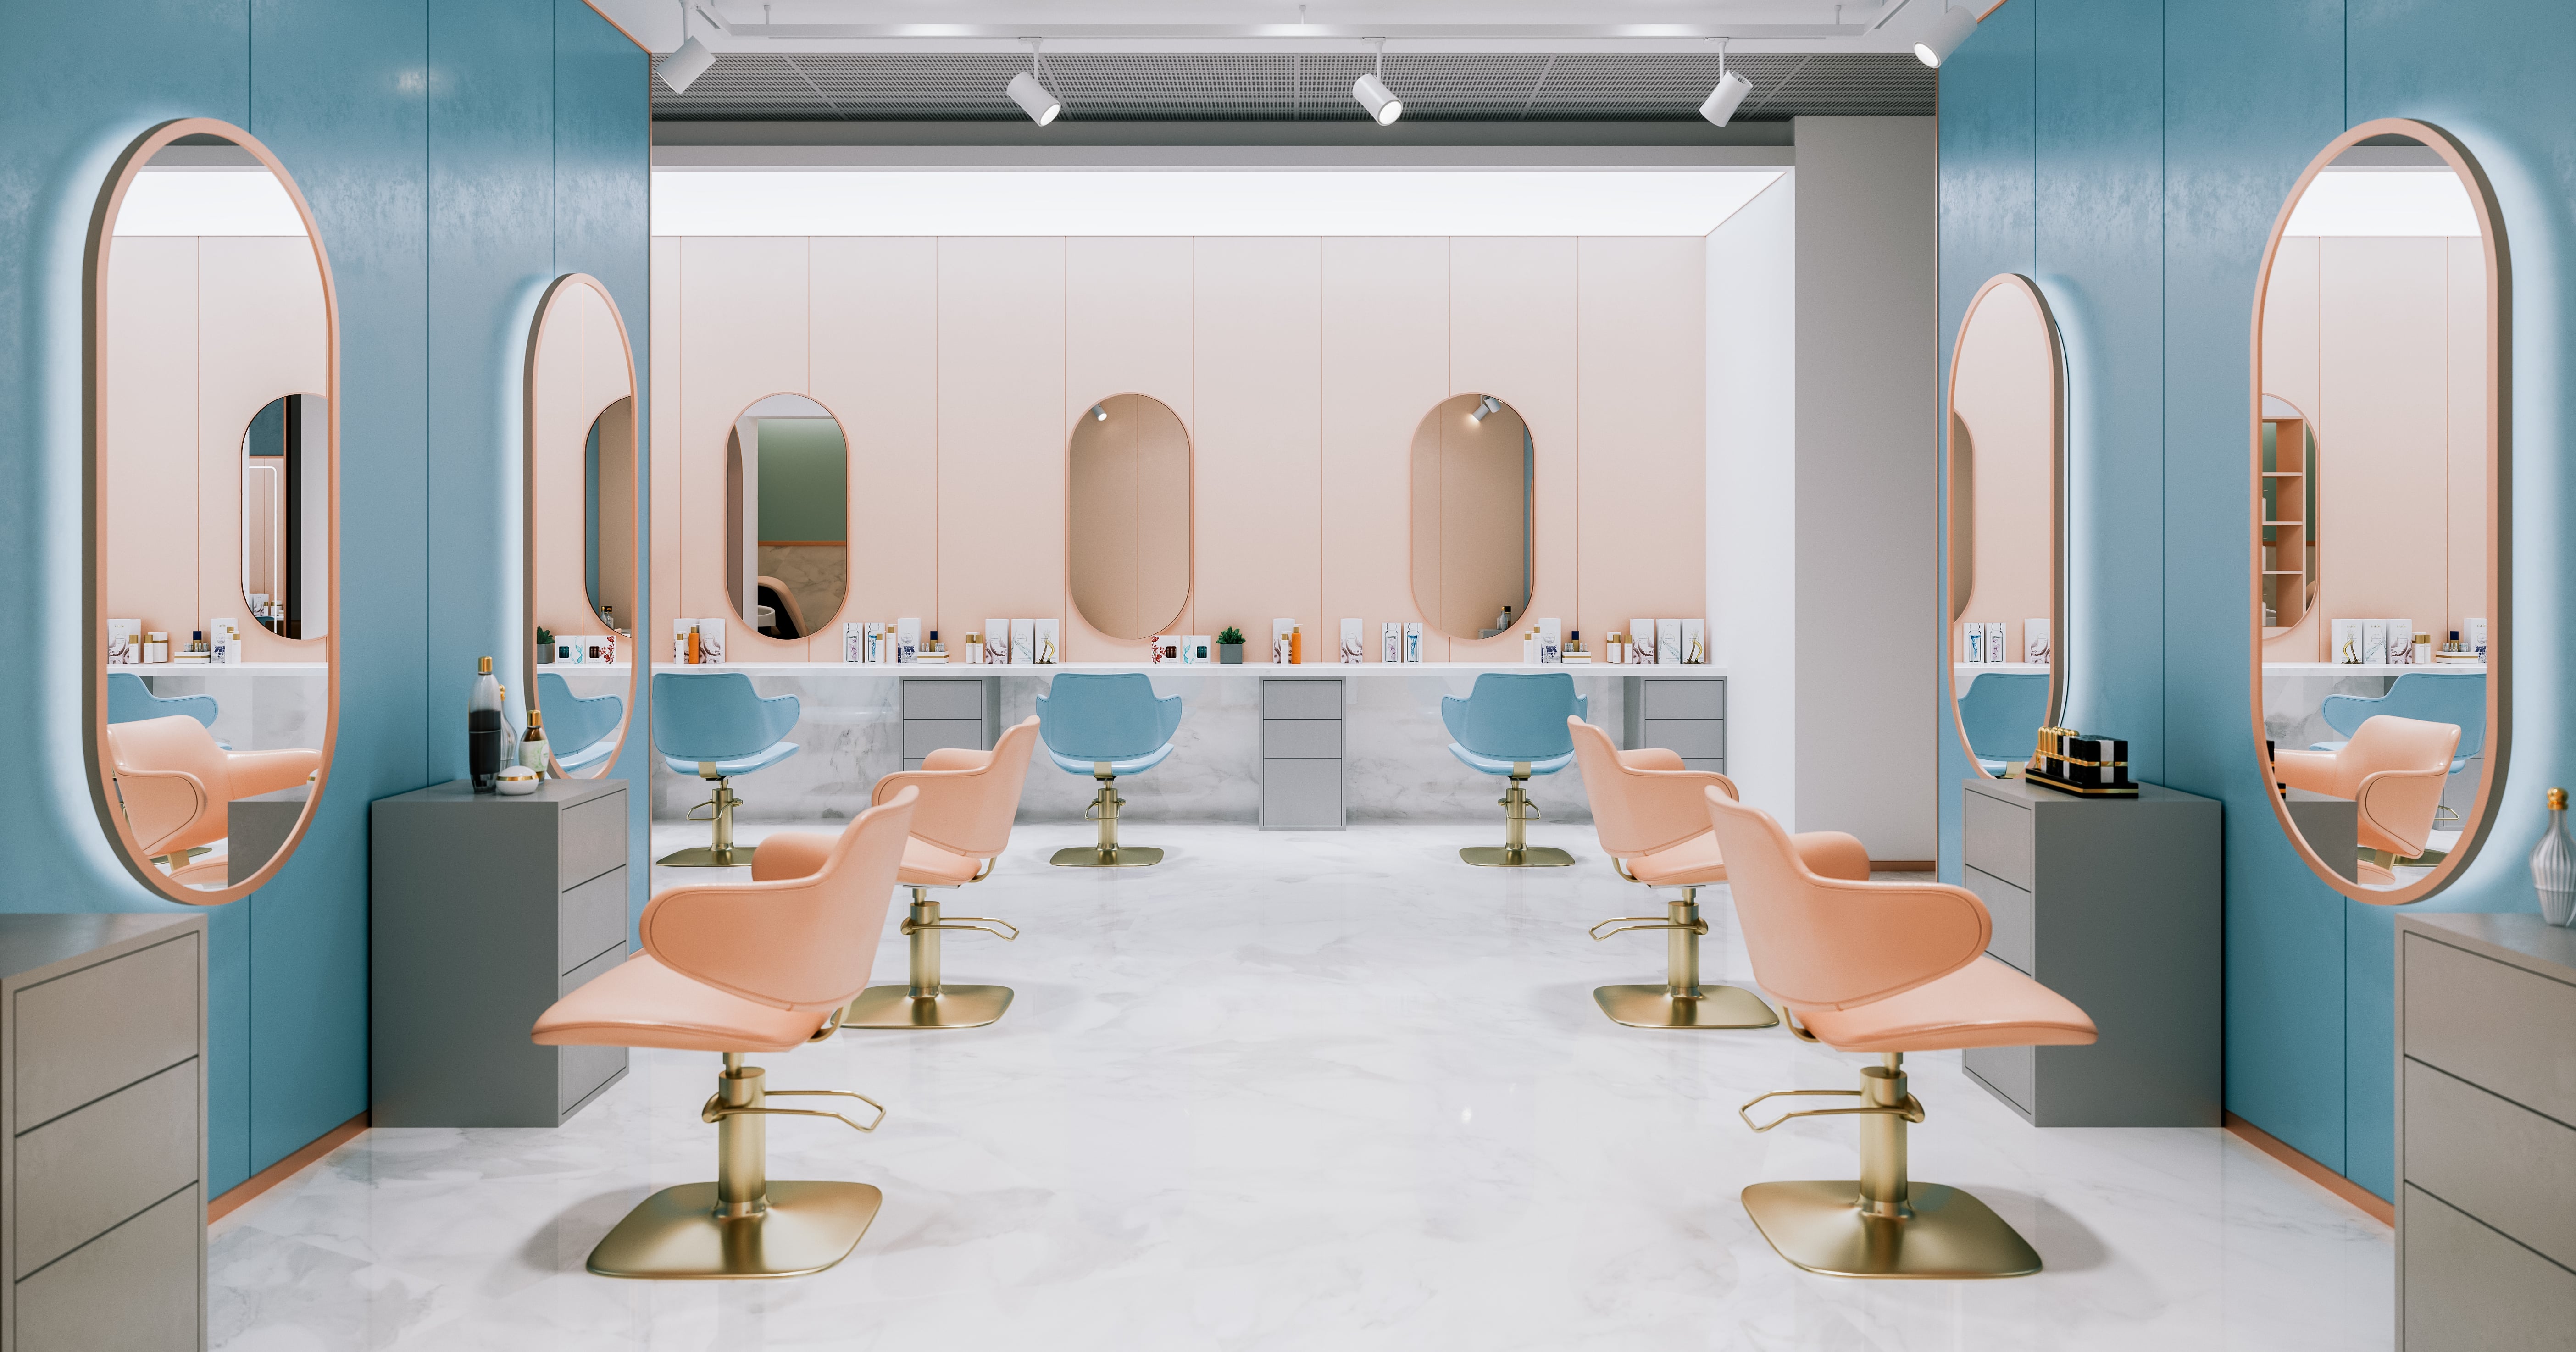 The Best Brow Salons in Every Major City, According to Editors